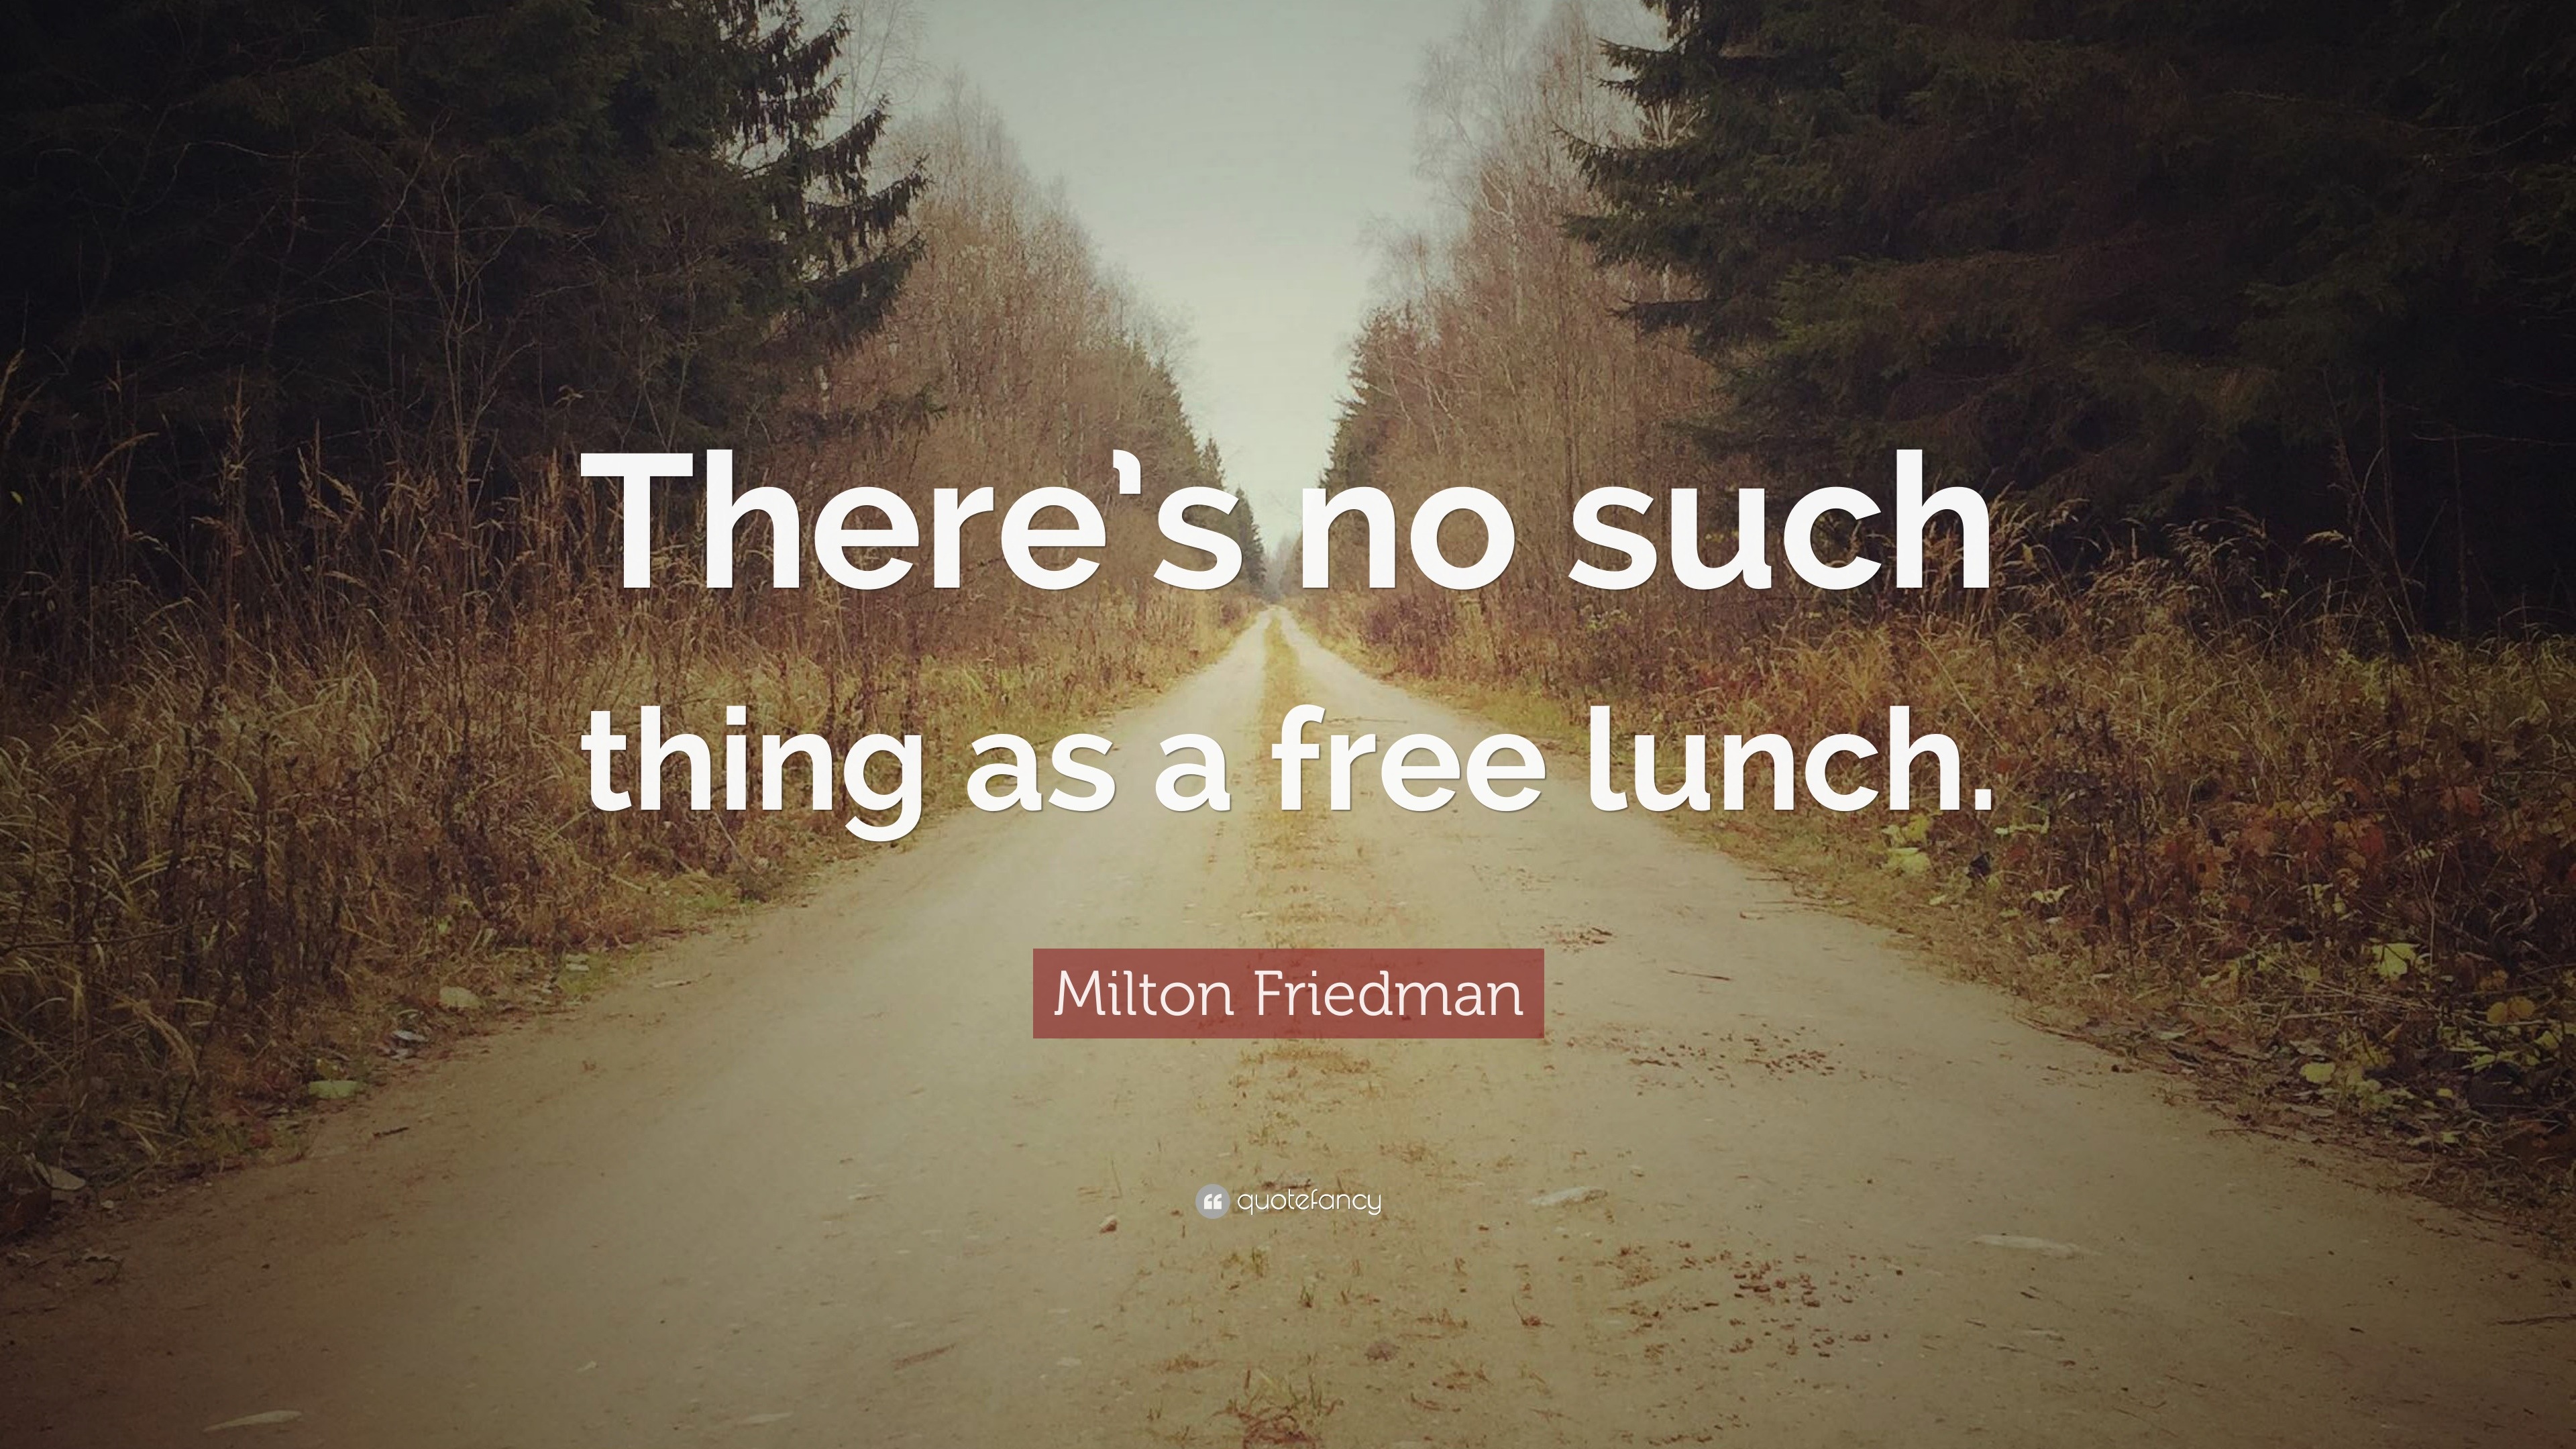 Milton Friedman Quote: “There’s no such thing as a free lunch.”